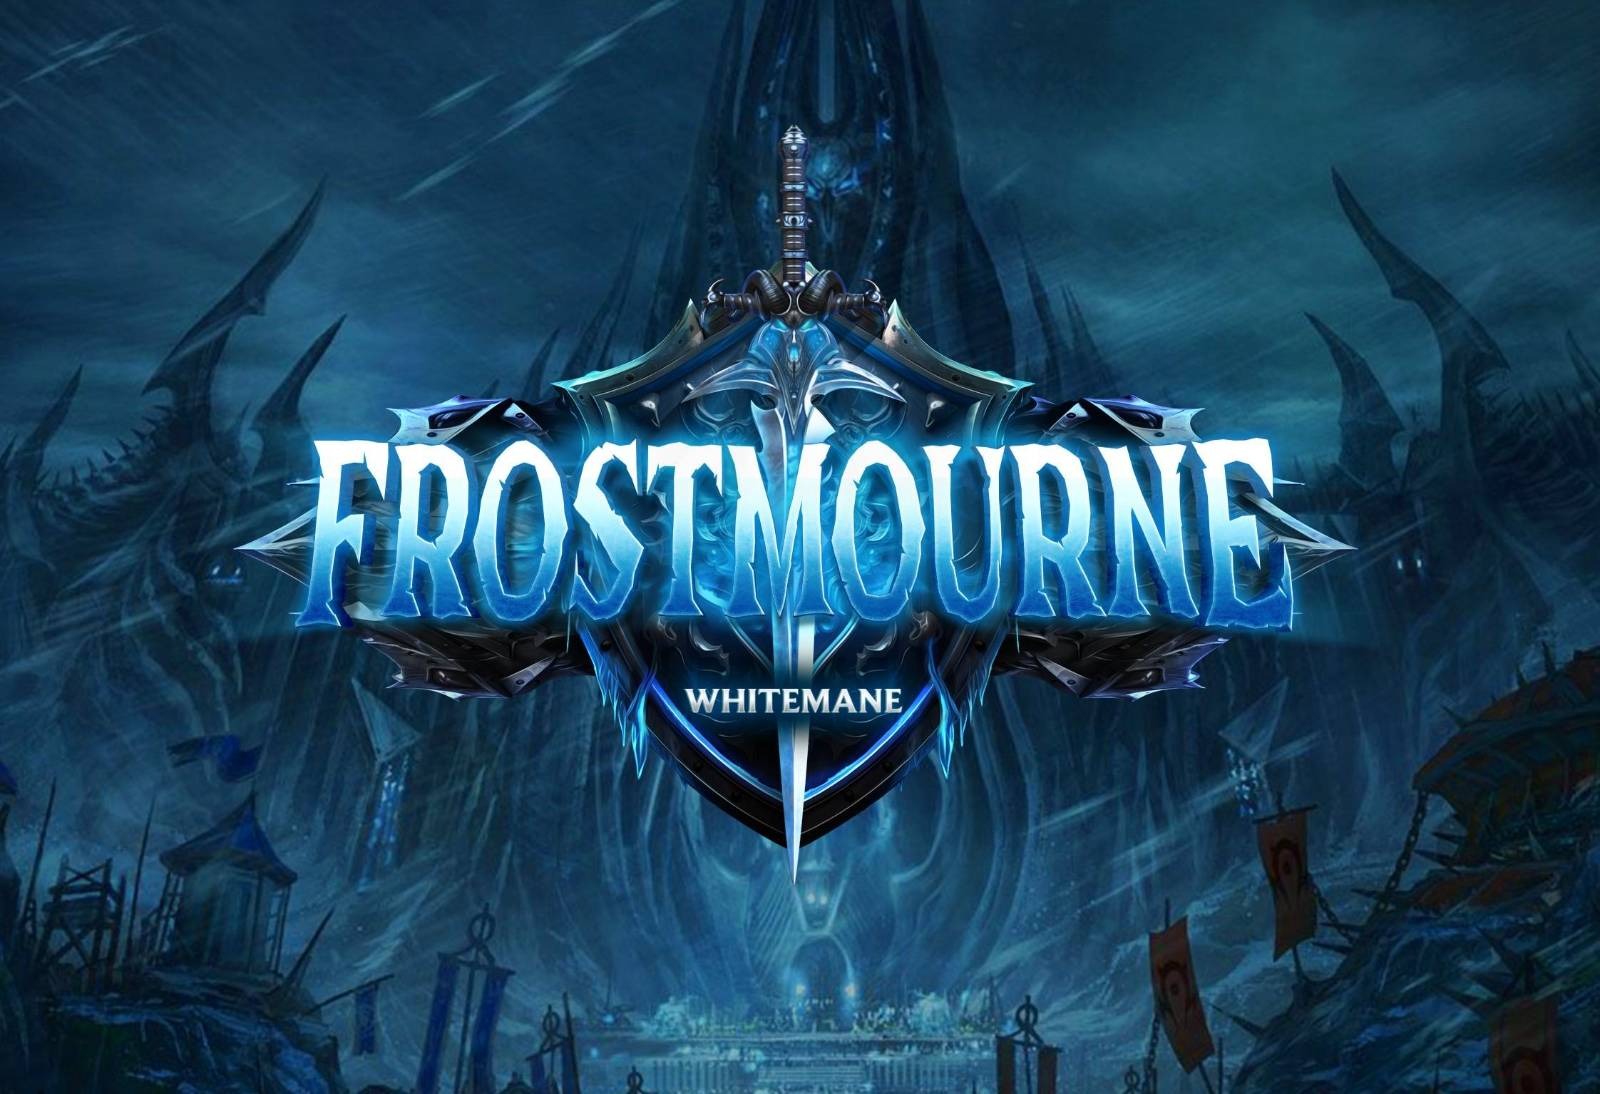 Frostmourne hungers